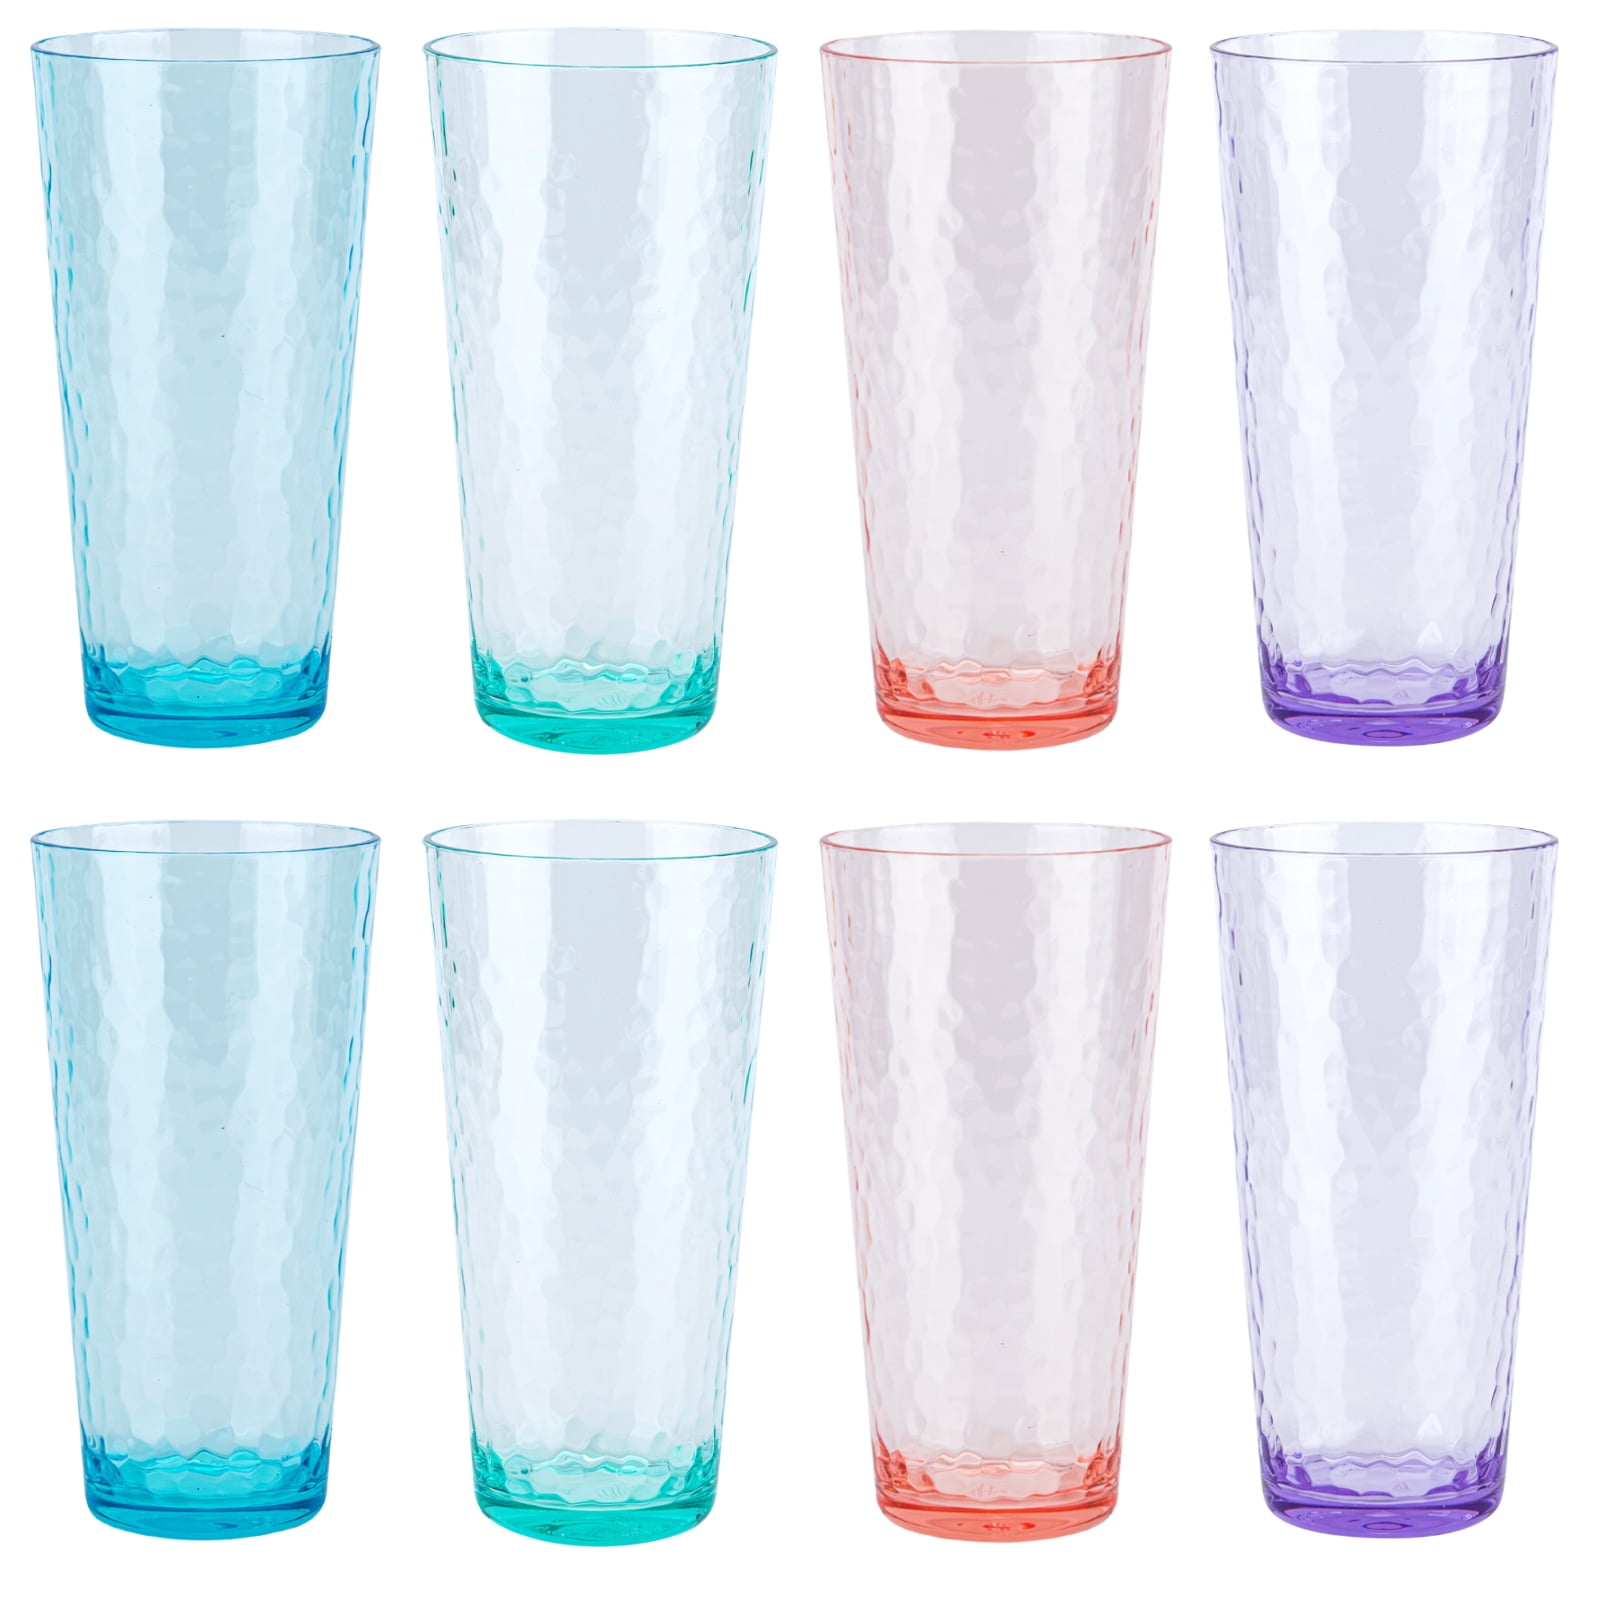 KX-WARE 32-ounce Plastic Tumblers Large Drinking Glasses, Set of 12  Multicolor - Unbreakable, Dishwasher Safe, BPA Free